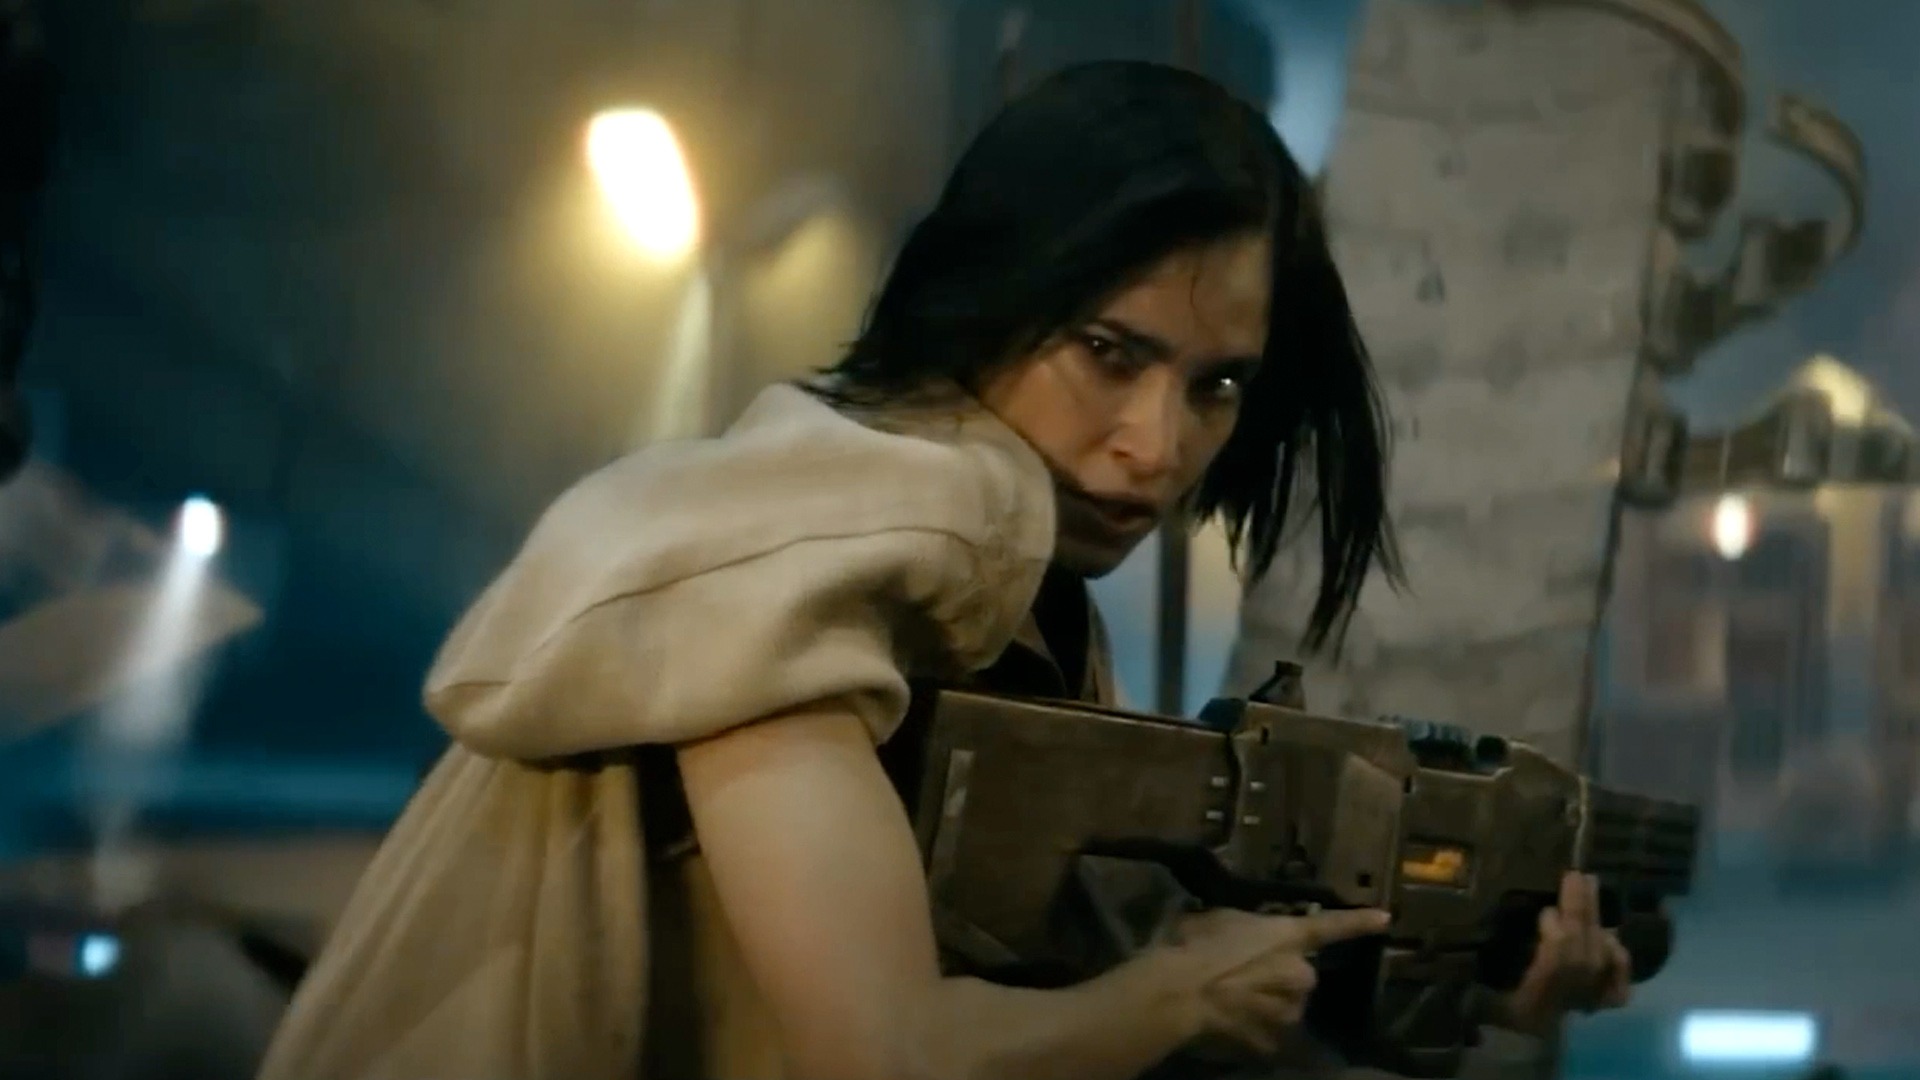 Watch 1st full trailer for Zack Snyder's sci-fi epic 'Rebel Moon' (video)